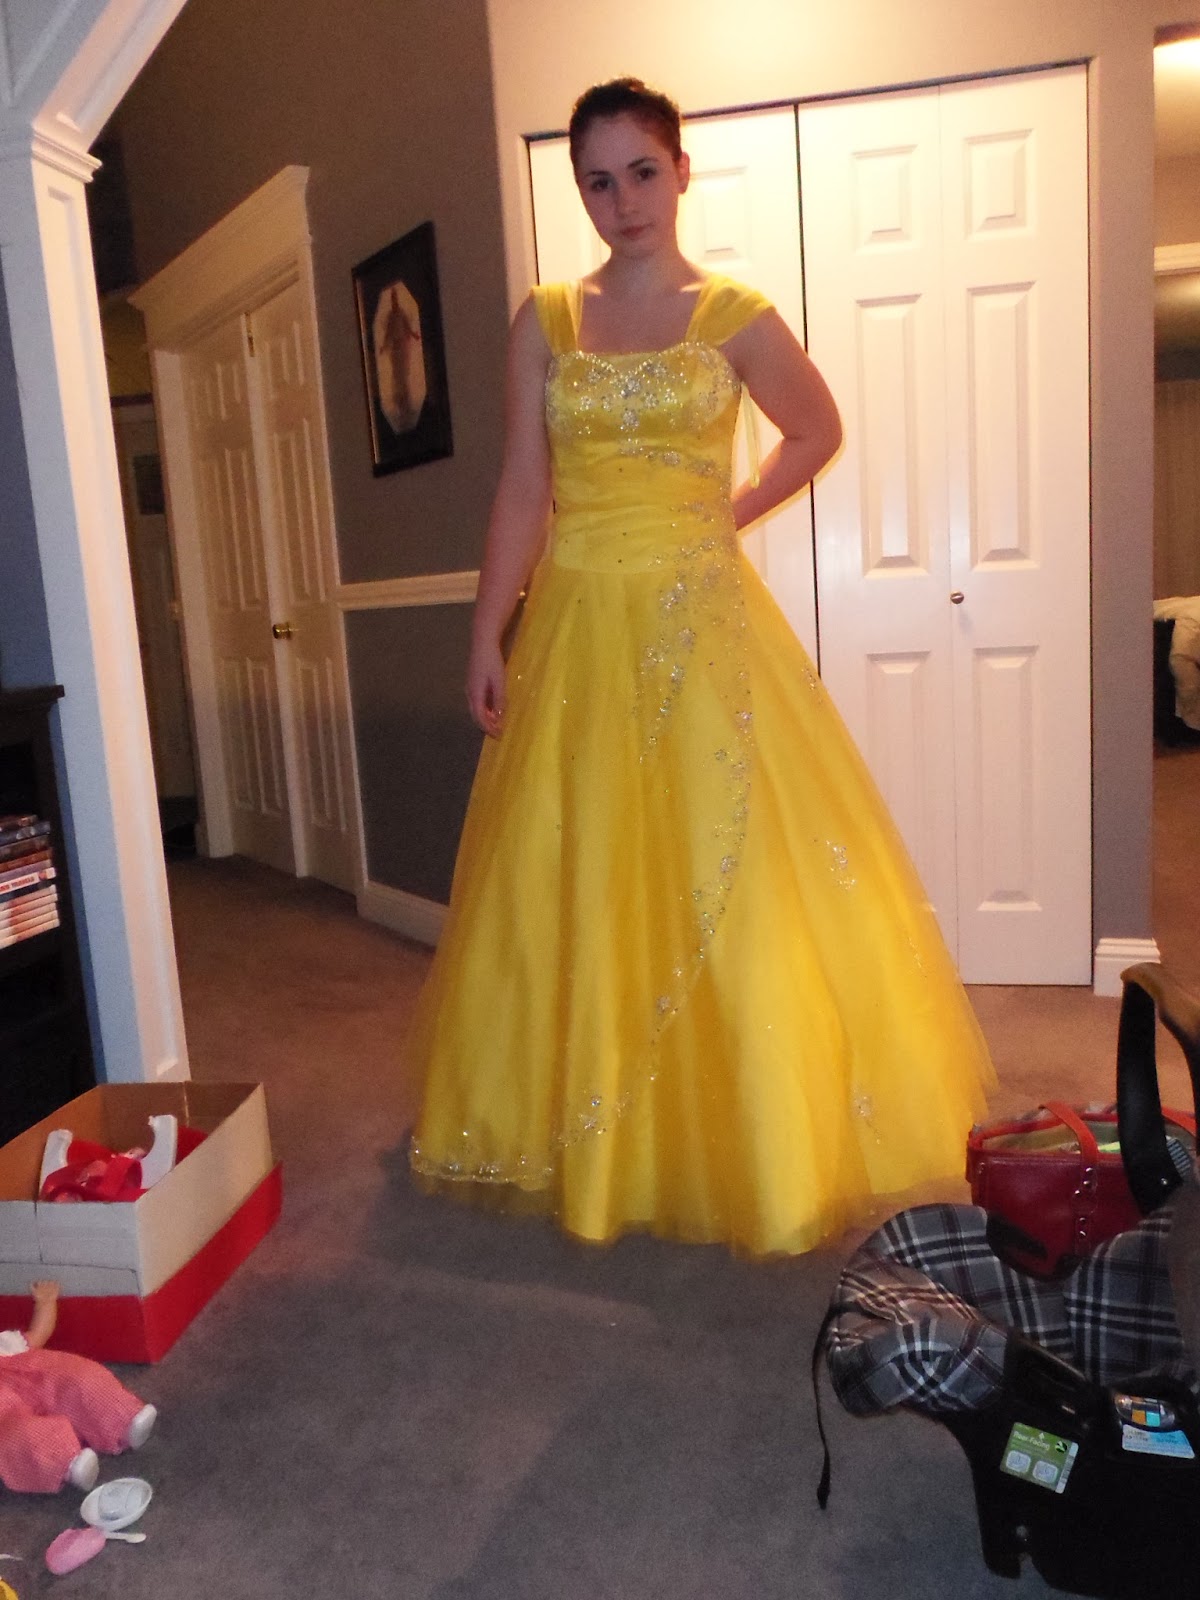 My Adventures as White River Daffodil Princess: Trying on the Daffodil ...